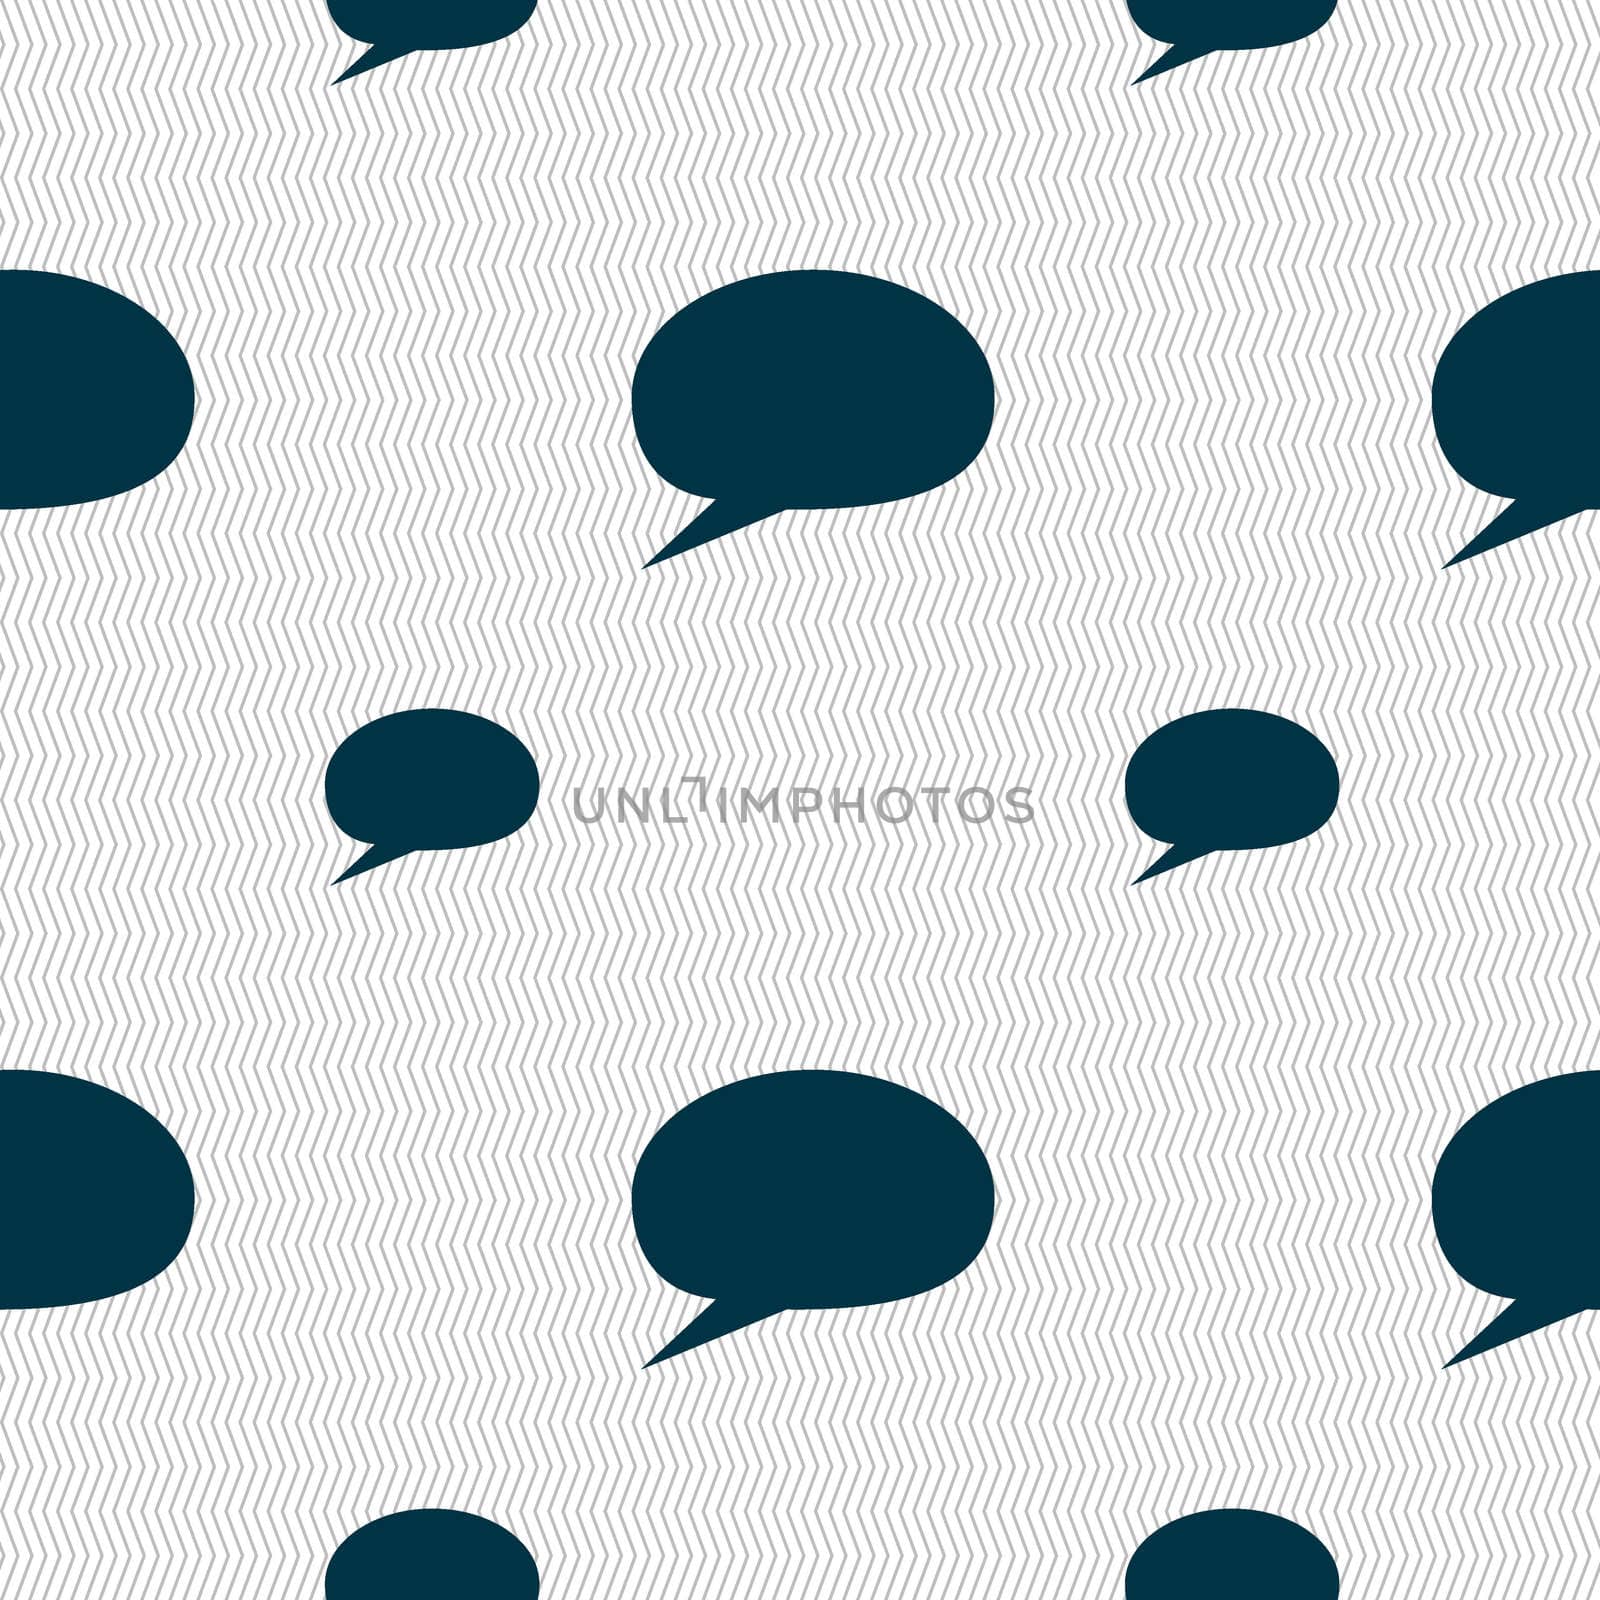 Speech bubble icons. Think cloud symbols. Seamless pattern with geometric texture. illustration